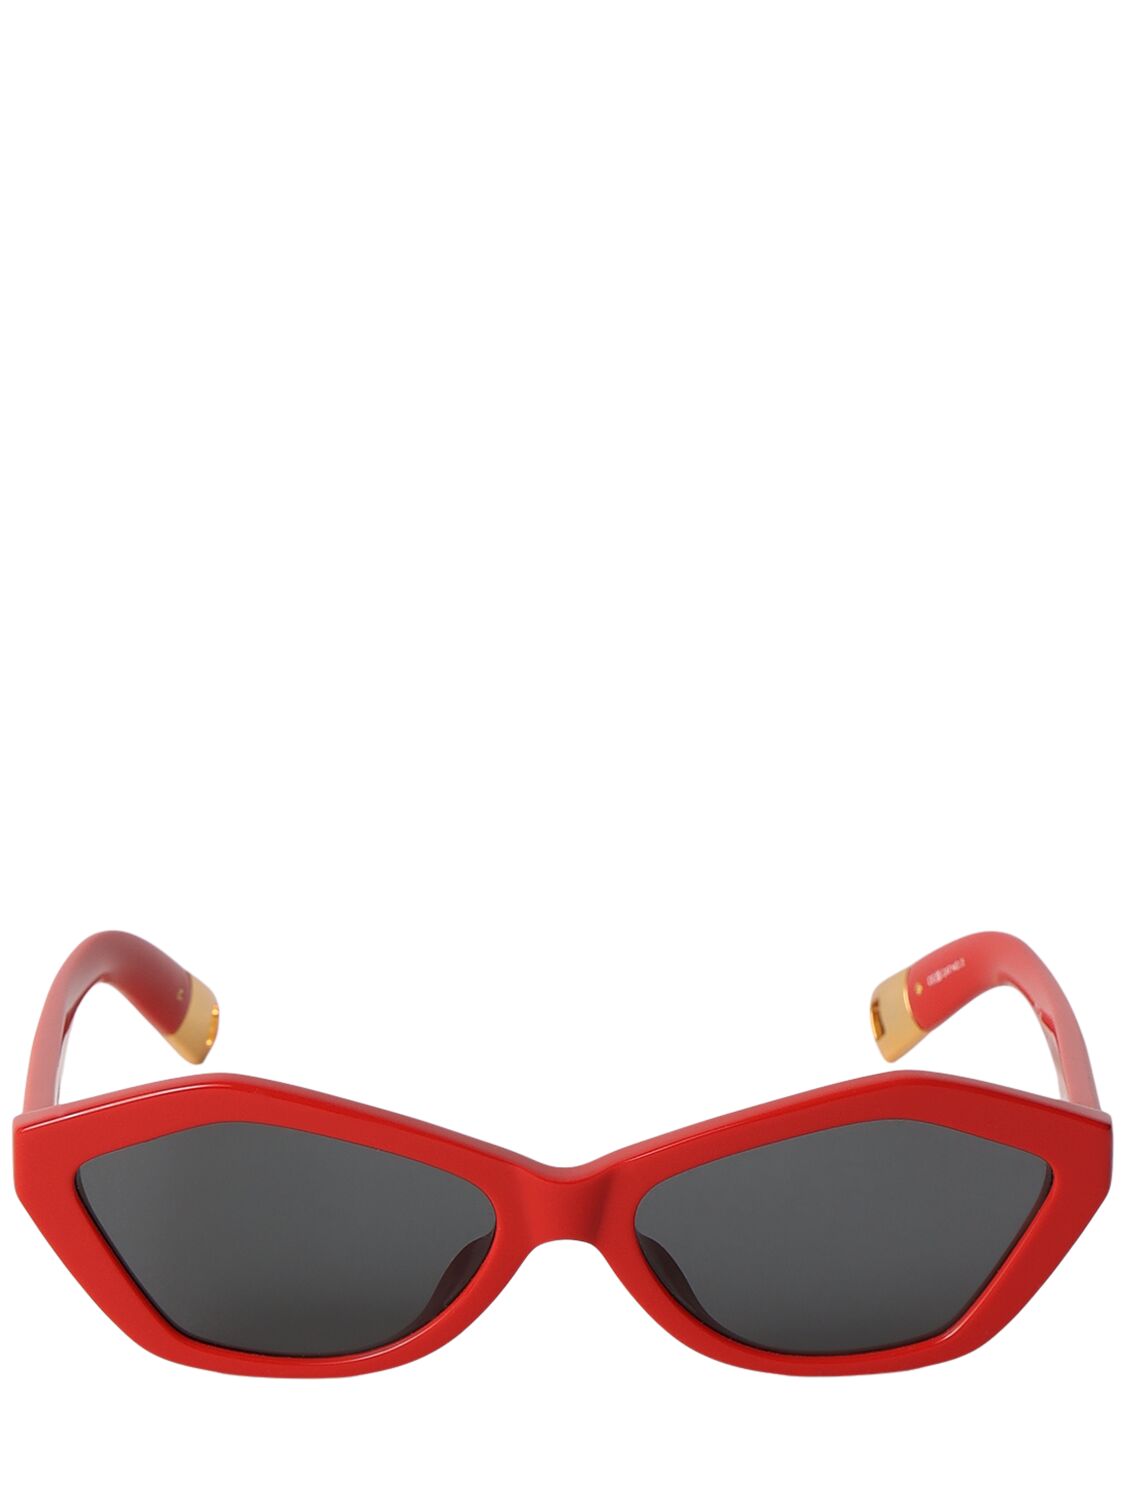 Jacquemus Les Lunettes Bambino Acetate Sunglasses In Red